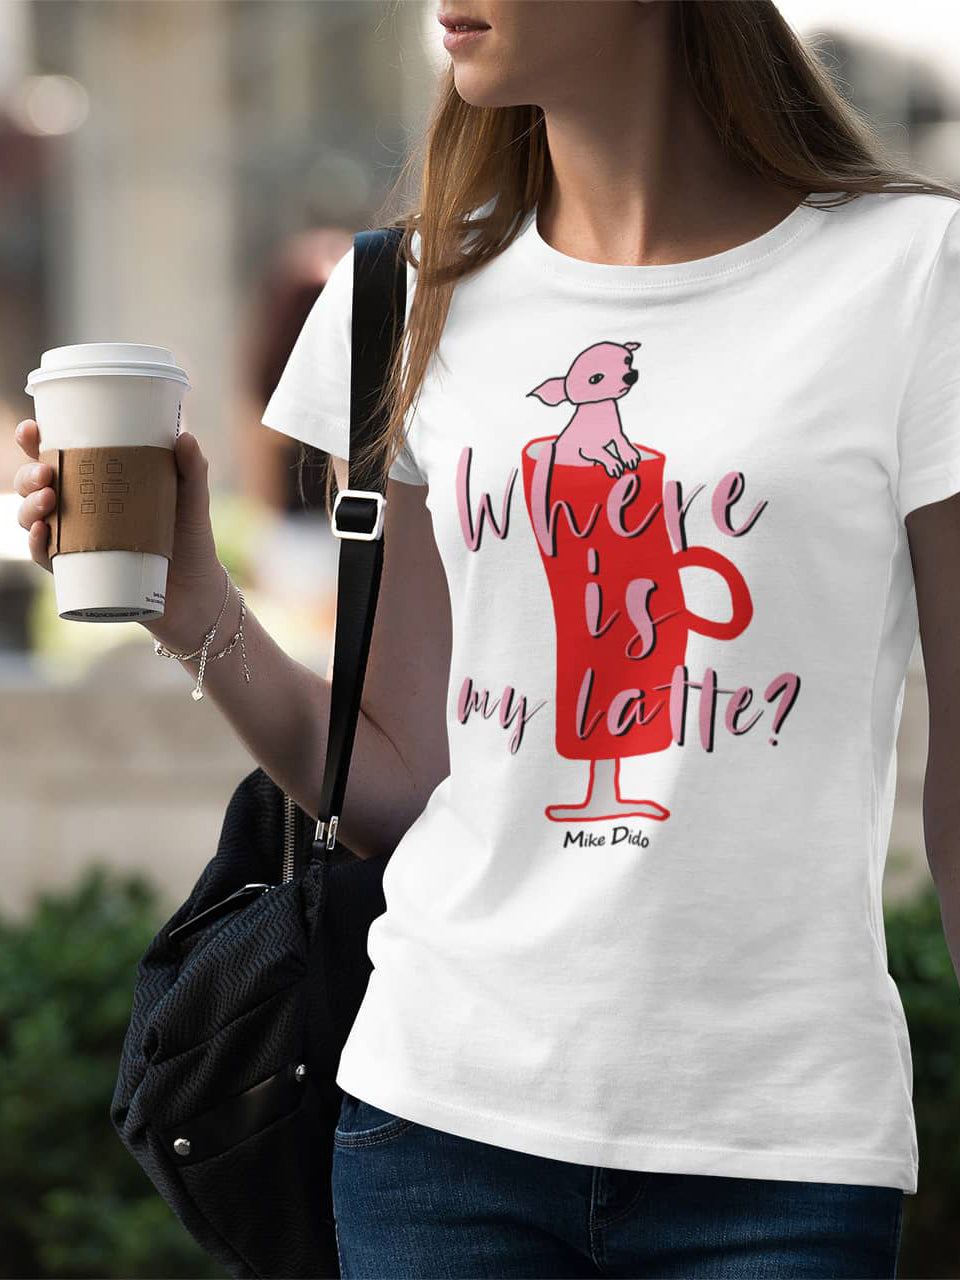 Coffe Shirt With Dog For Women Men by Mike Dido